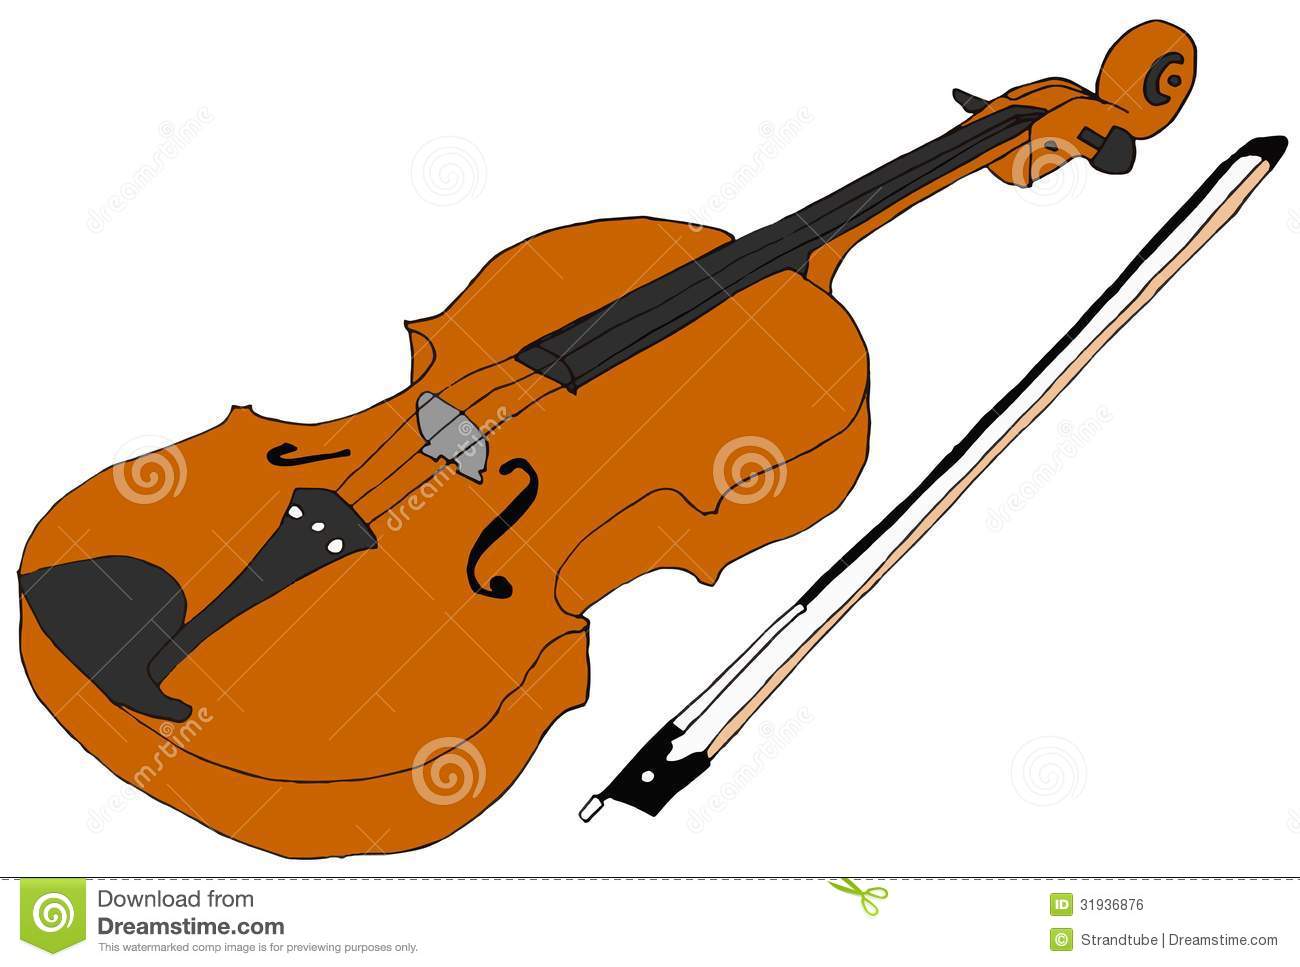 Violin Bow Clipart Displaying 19 Images For Violin Bow Clipart Toolbar